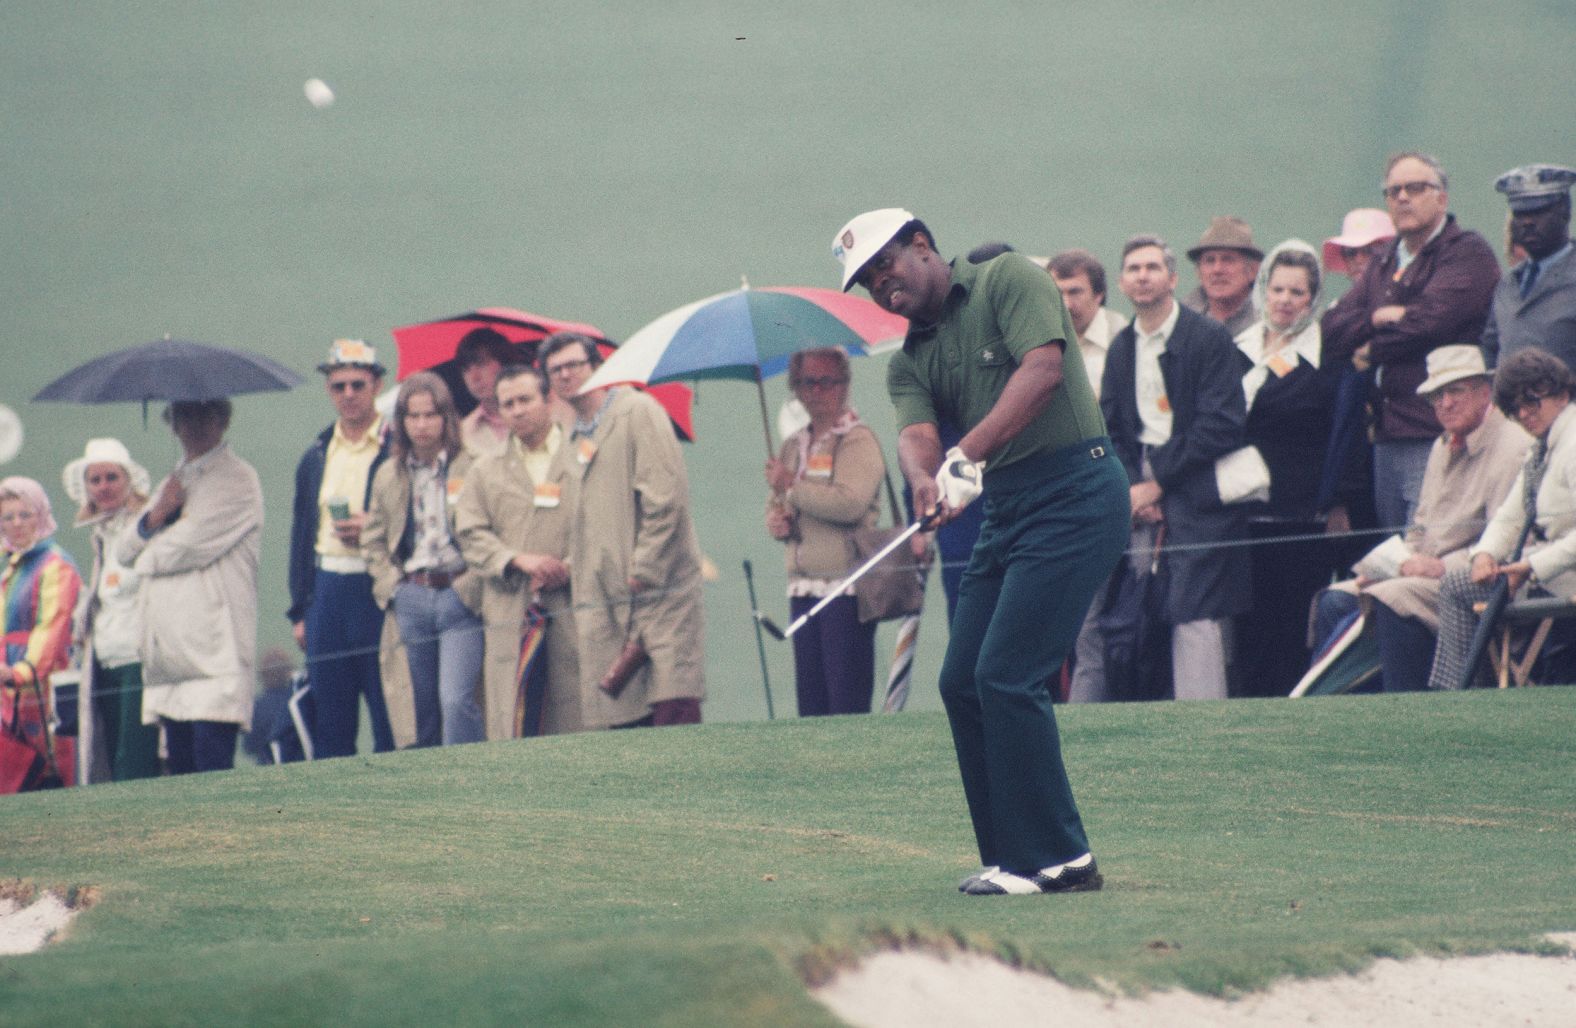 Elder watches a chip shot at the 1975 Masters. Elder broke into the game during the 1960s and 70s, a notoriously volatile period for race relations in the United States. At one tournament, he had been forced to change in the parking lot after being refused entry to the clubhouse; during another, his ball had been hurled into a hedge by a spectator.